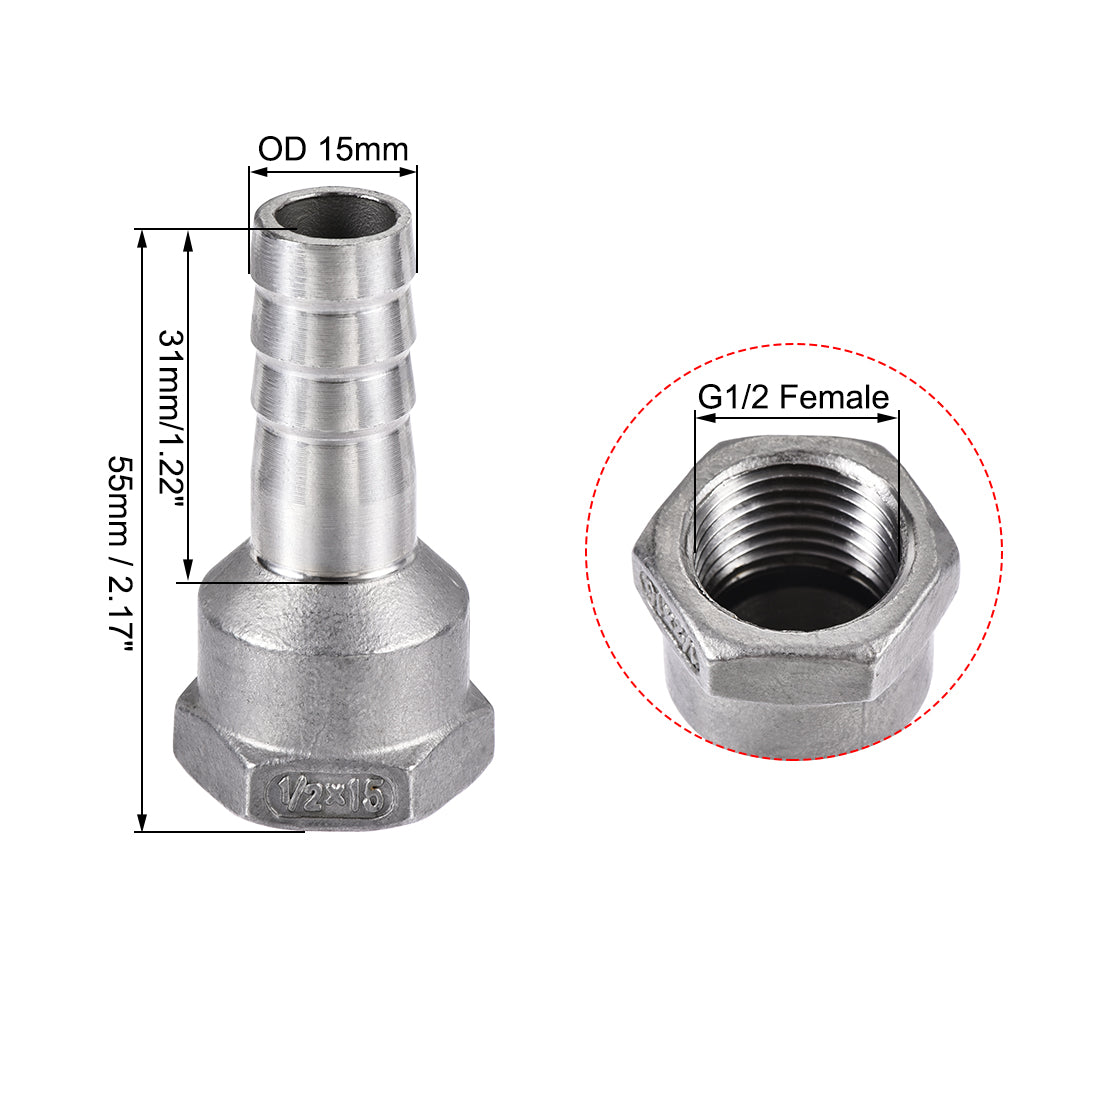 uxcell Uxcell 304 Stainless Steel Hose Barb Fitting Coupler 15mm Barb G1/2 Female Thread